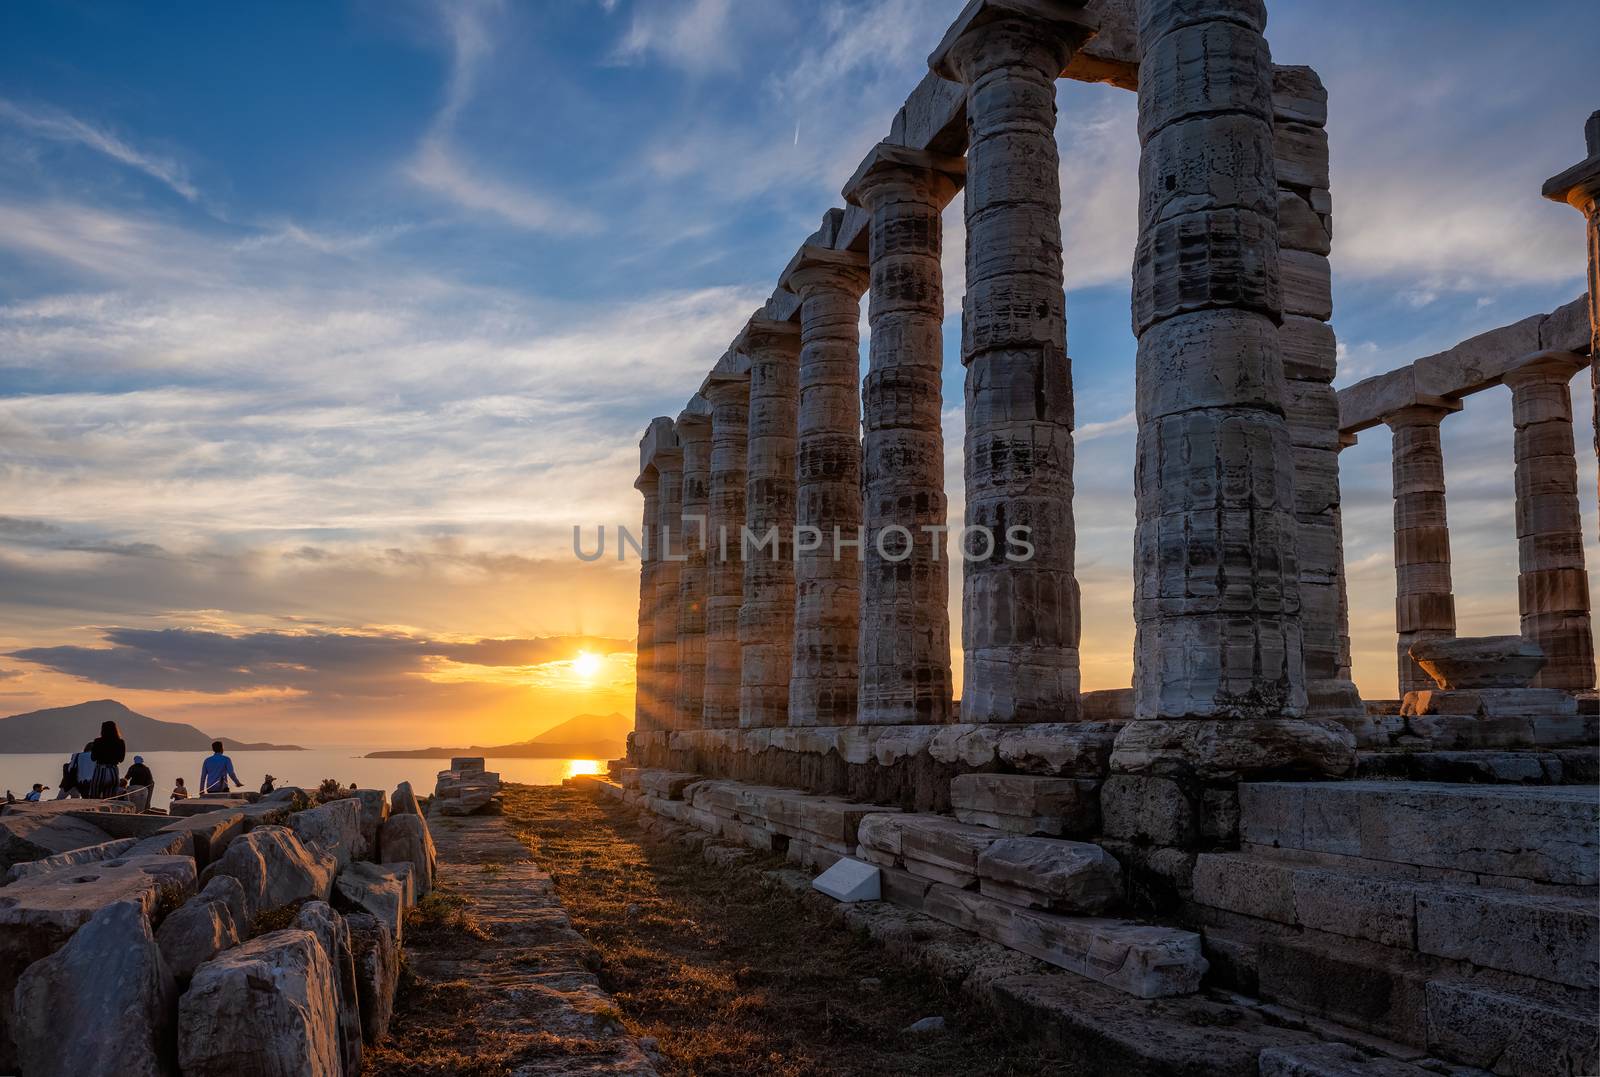 Cape Sounio sunset at Sounion with ruins of the iconic Poseidon temple. One of the Twelve Olympian Gods of ancient Greek religion and mythology. God of the sea, earthquakes. Aegean coast, Greece.